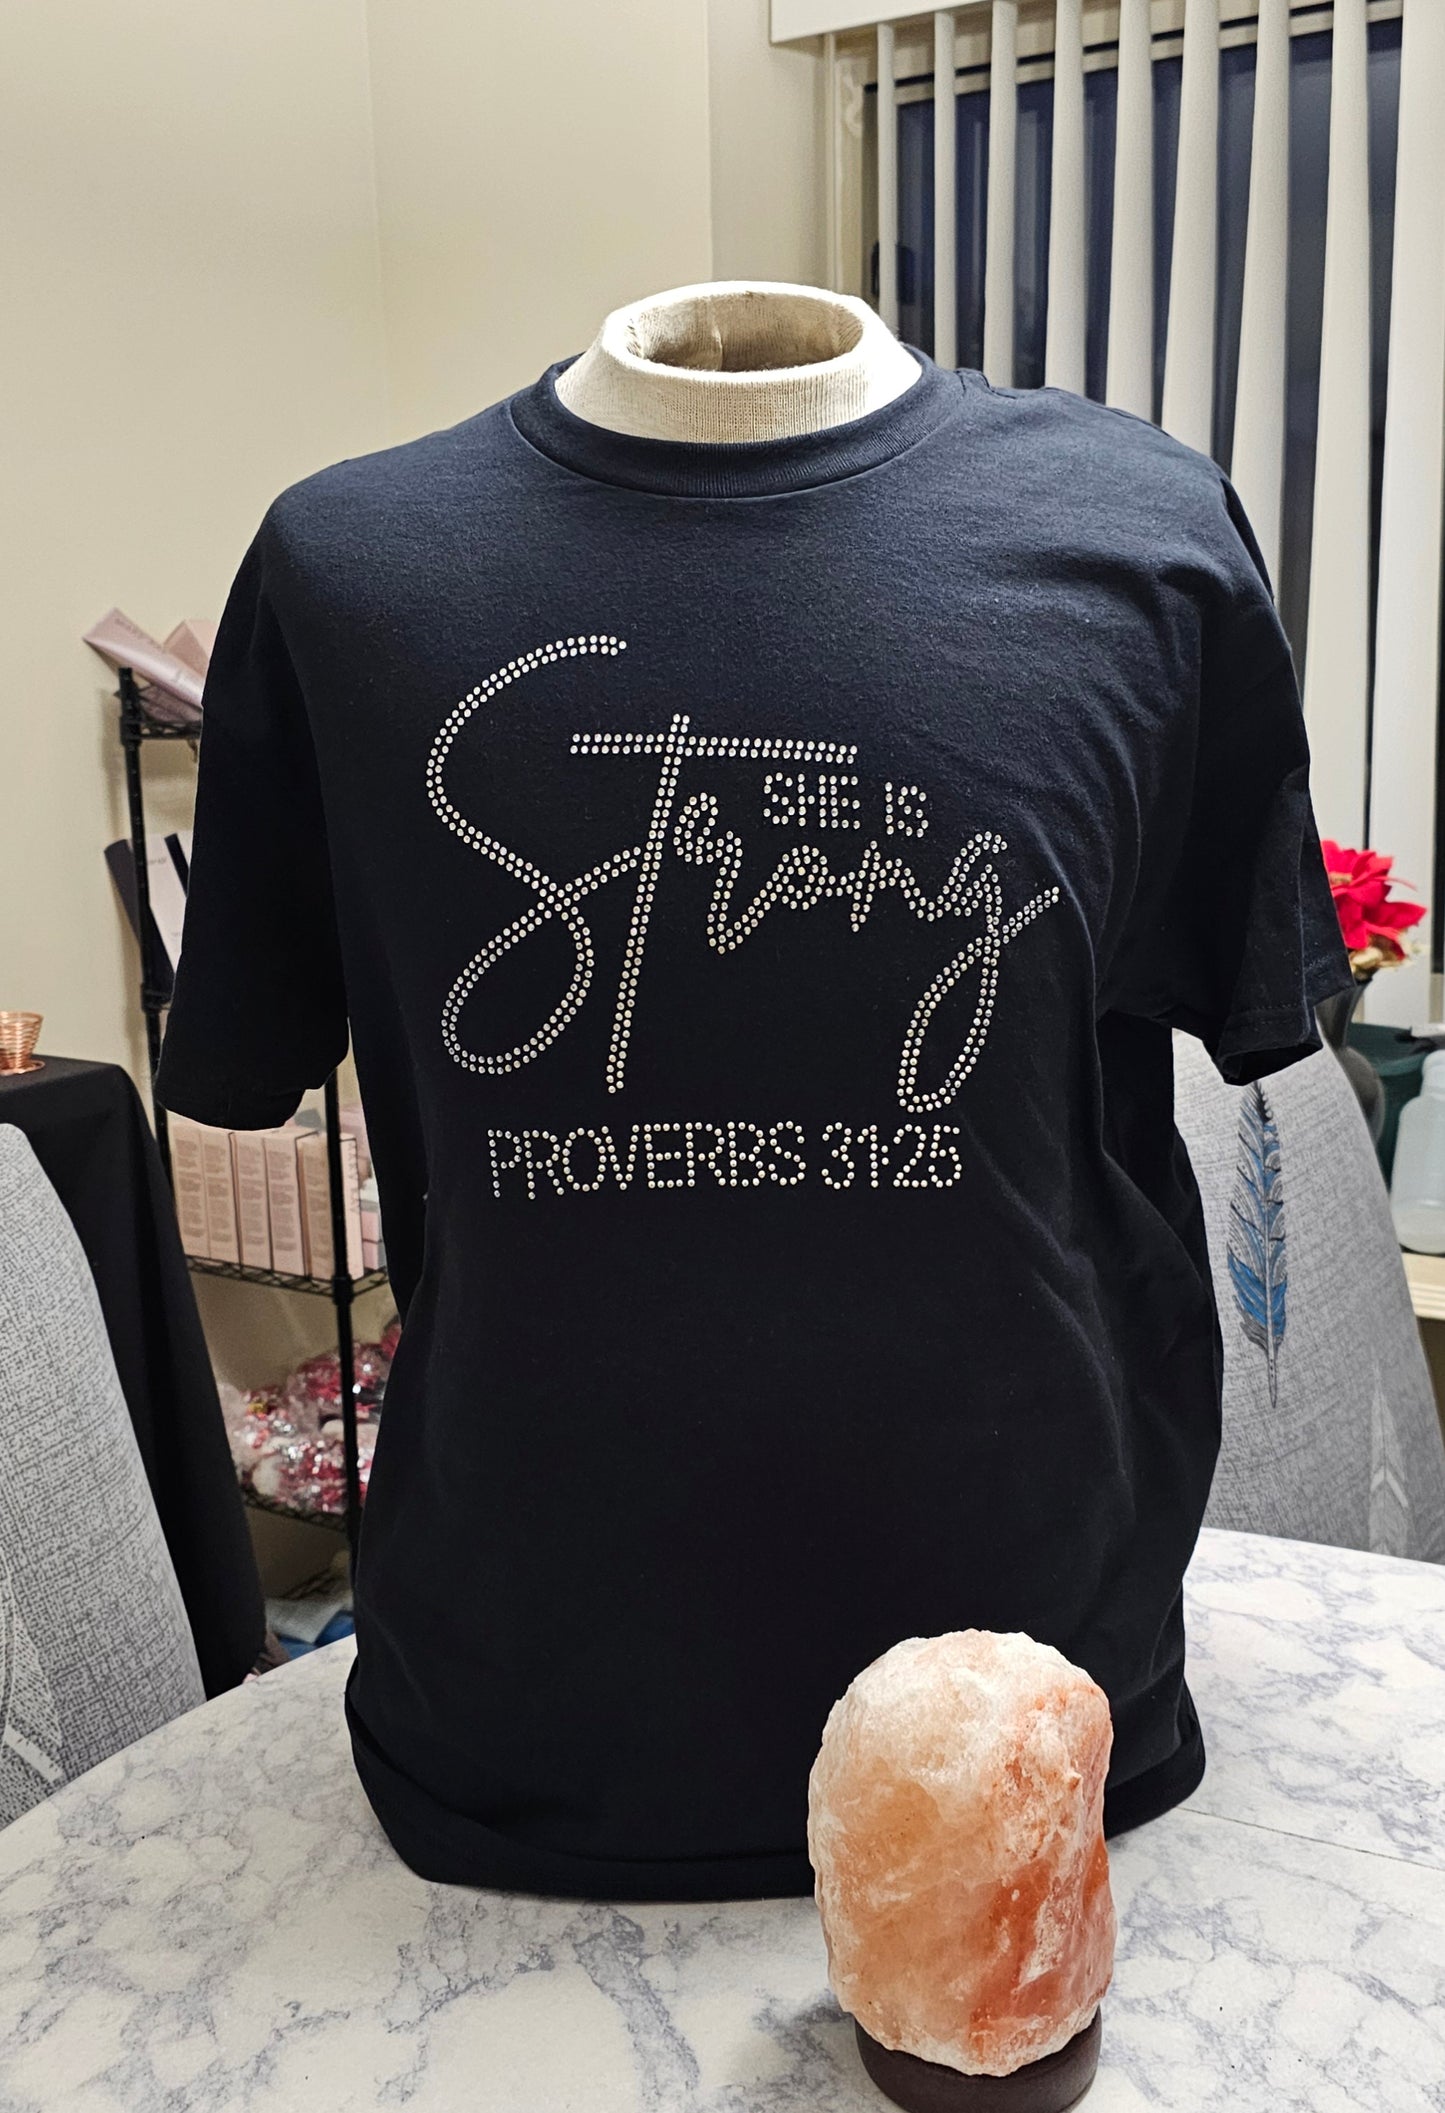 She is Strong t-shirt